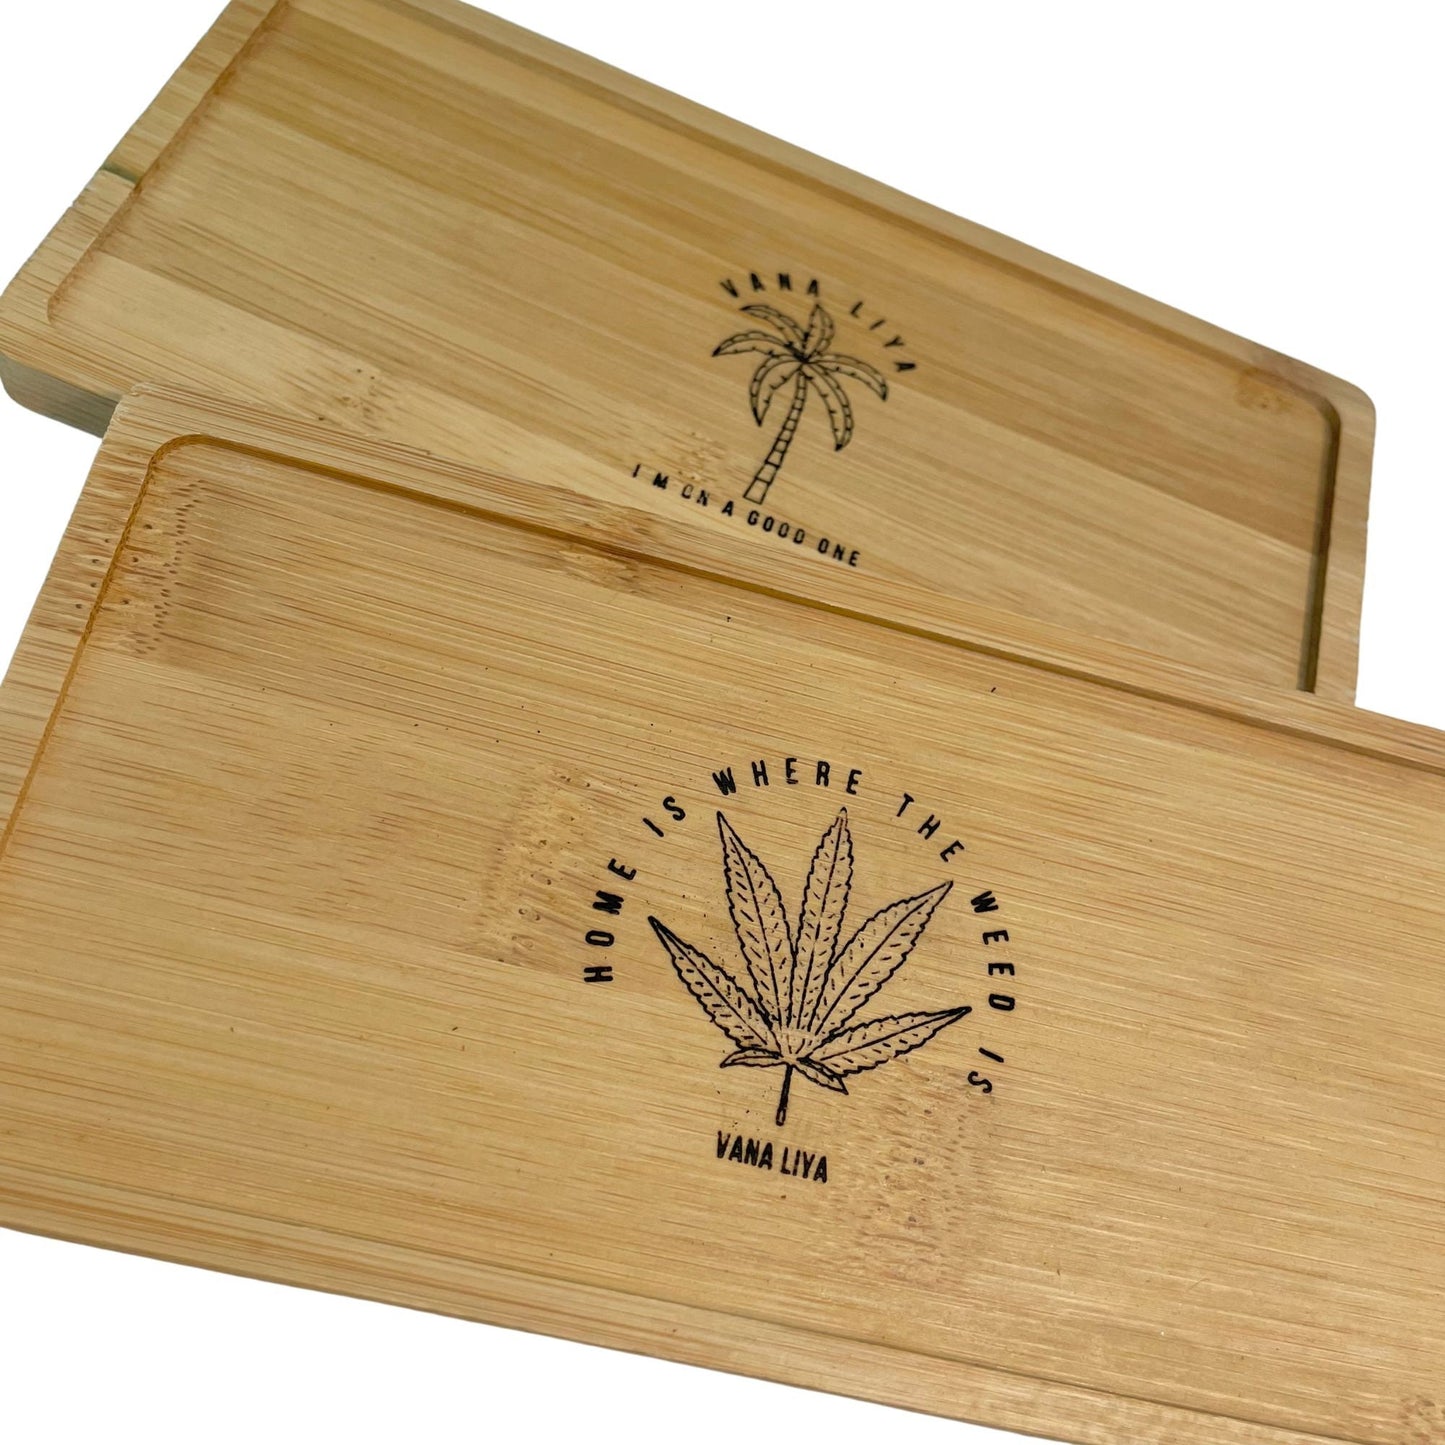 Bamboo Rolling Tray